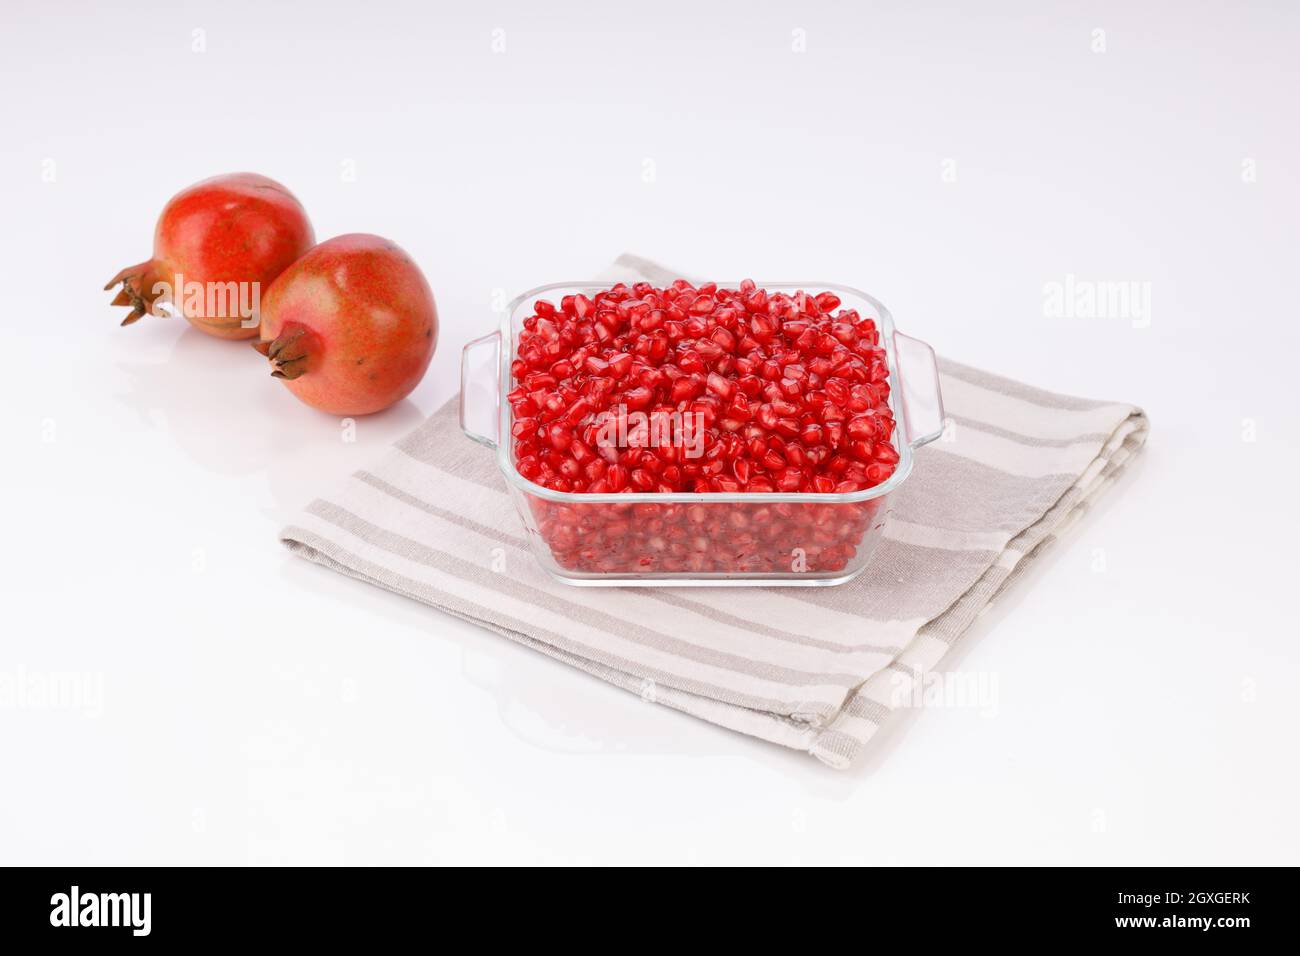 Fresh Pomegranate seed arranged in a square glass container with fresh fruit placed beside it on white background, isolated. Stock Photo